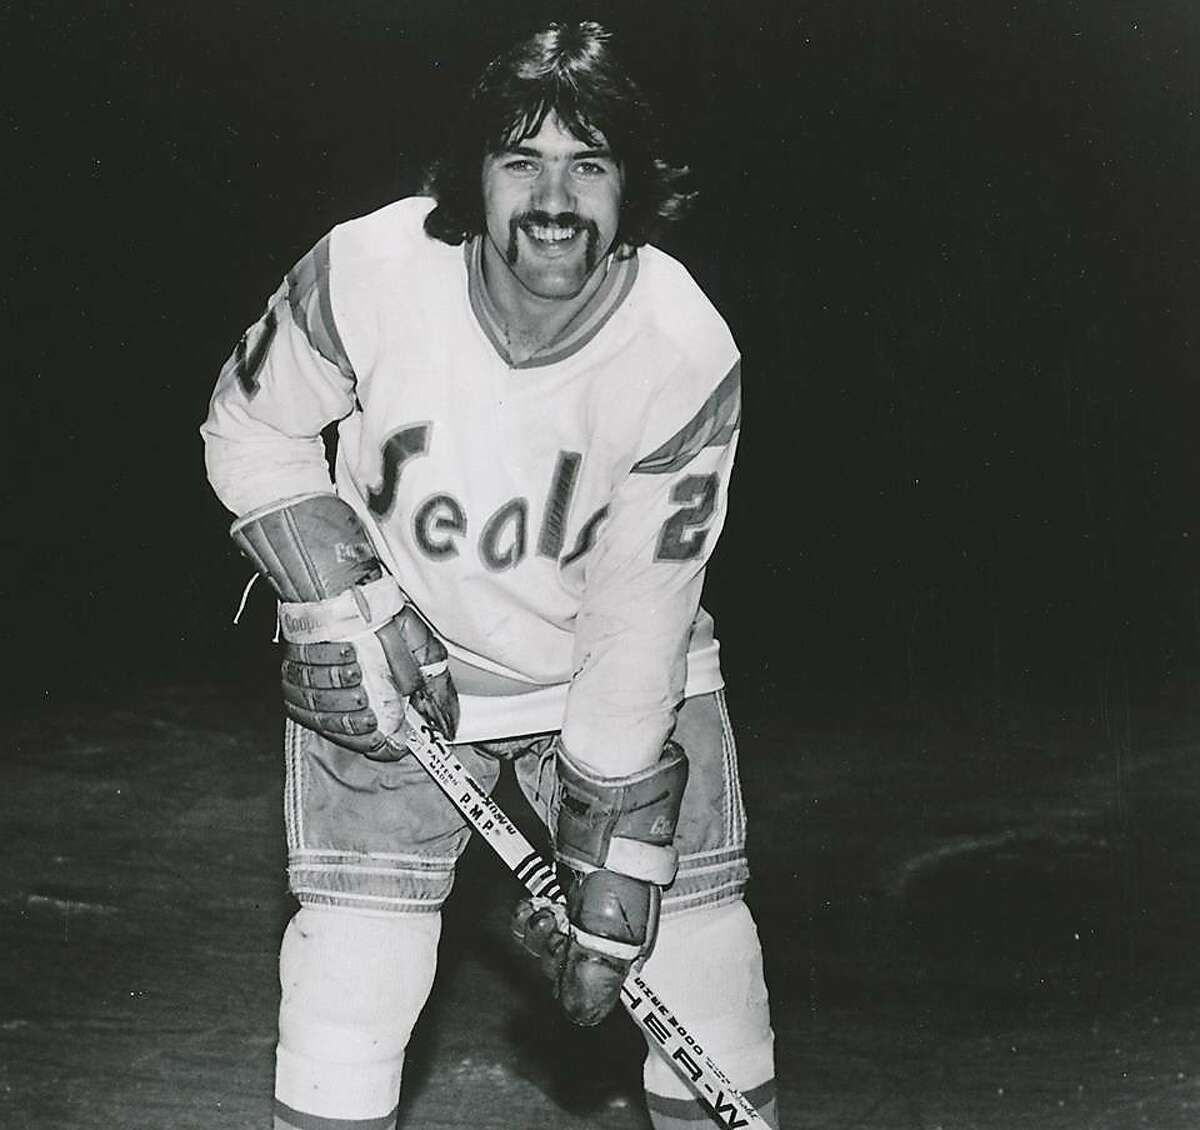 Dennis Maruk was a member of the California Golden Seals in the franchise's last season in the Bay Area (1975-76) and for the two seasons it existed as the Cleveland Barons. He is the Seals/Barons all-time leader in goals (94), is third in assists (117) and second in points (211).